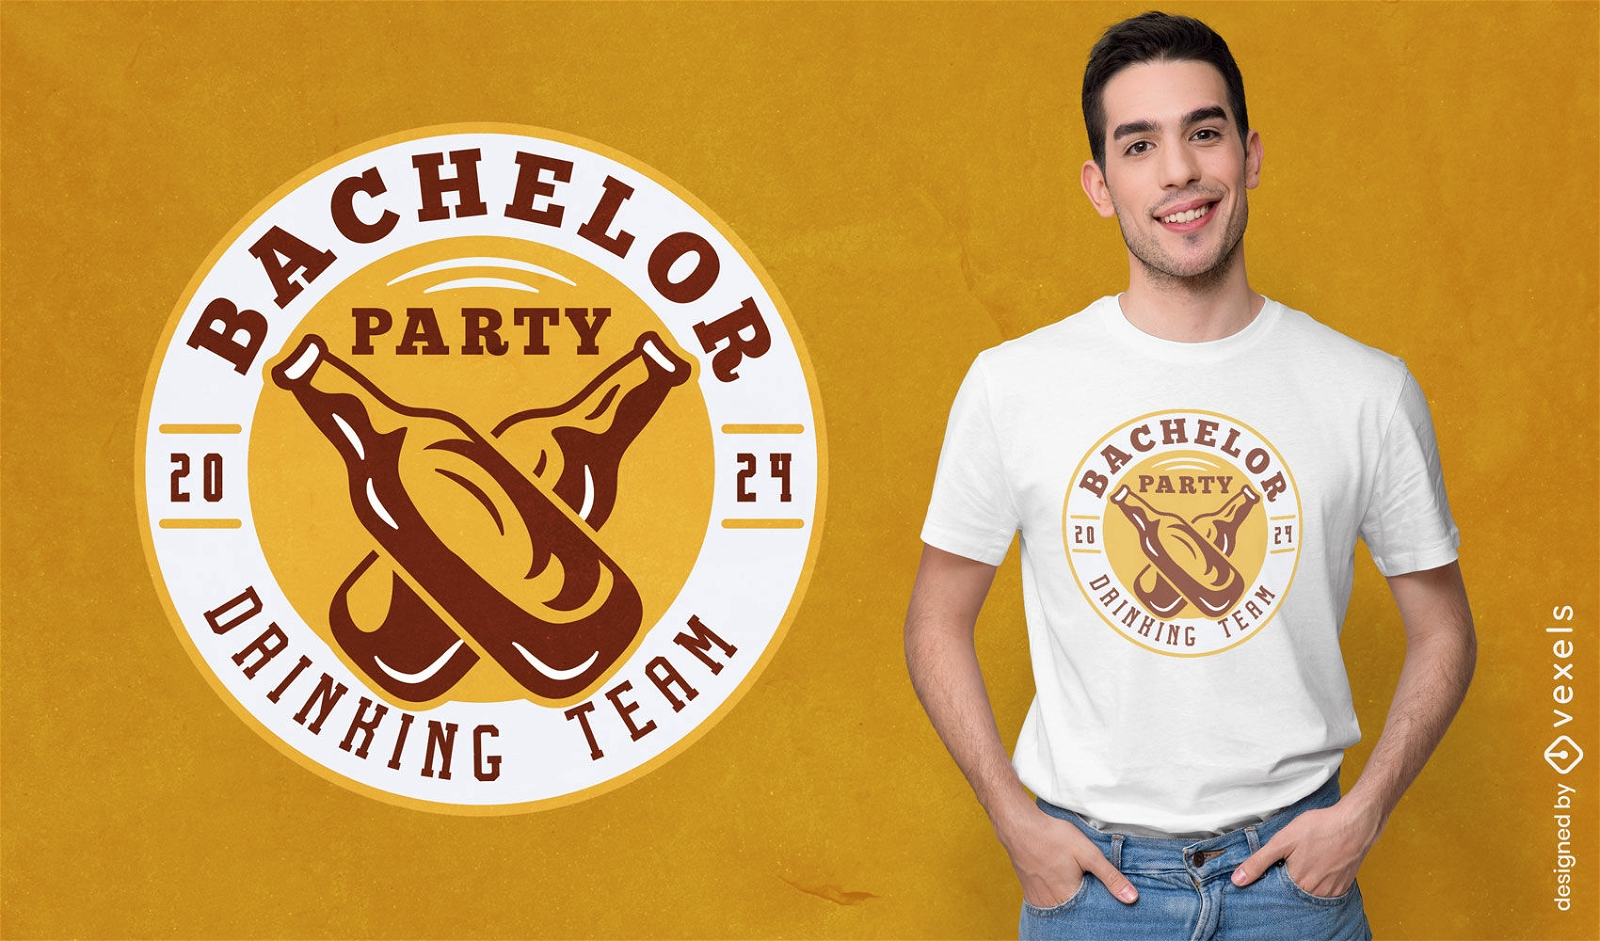 Ultimate bachelor party t-shirt design